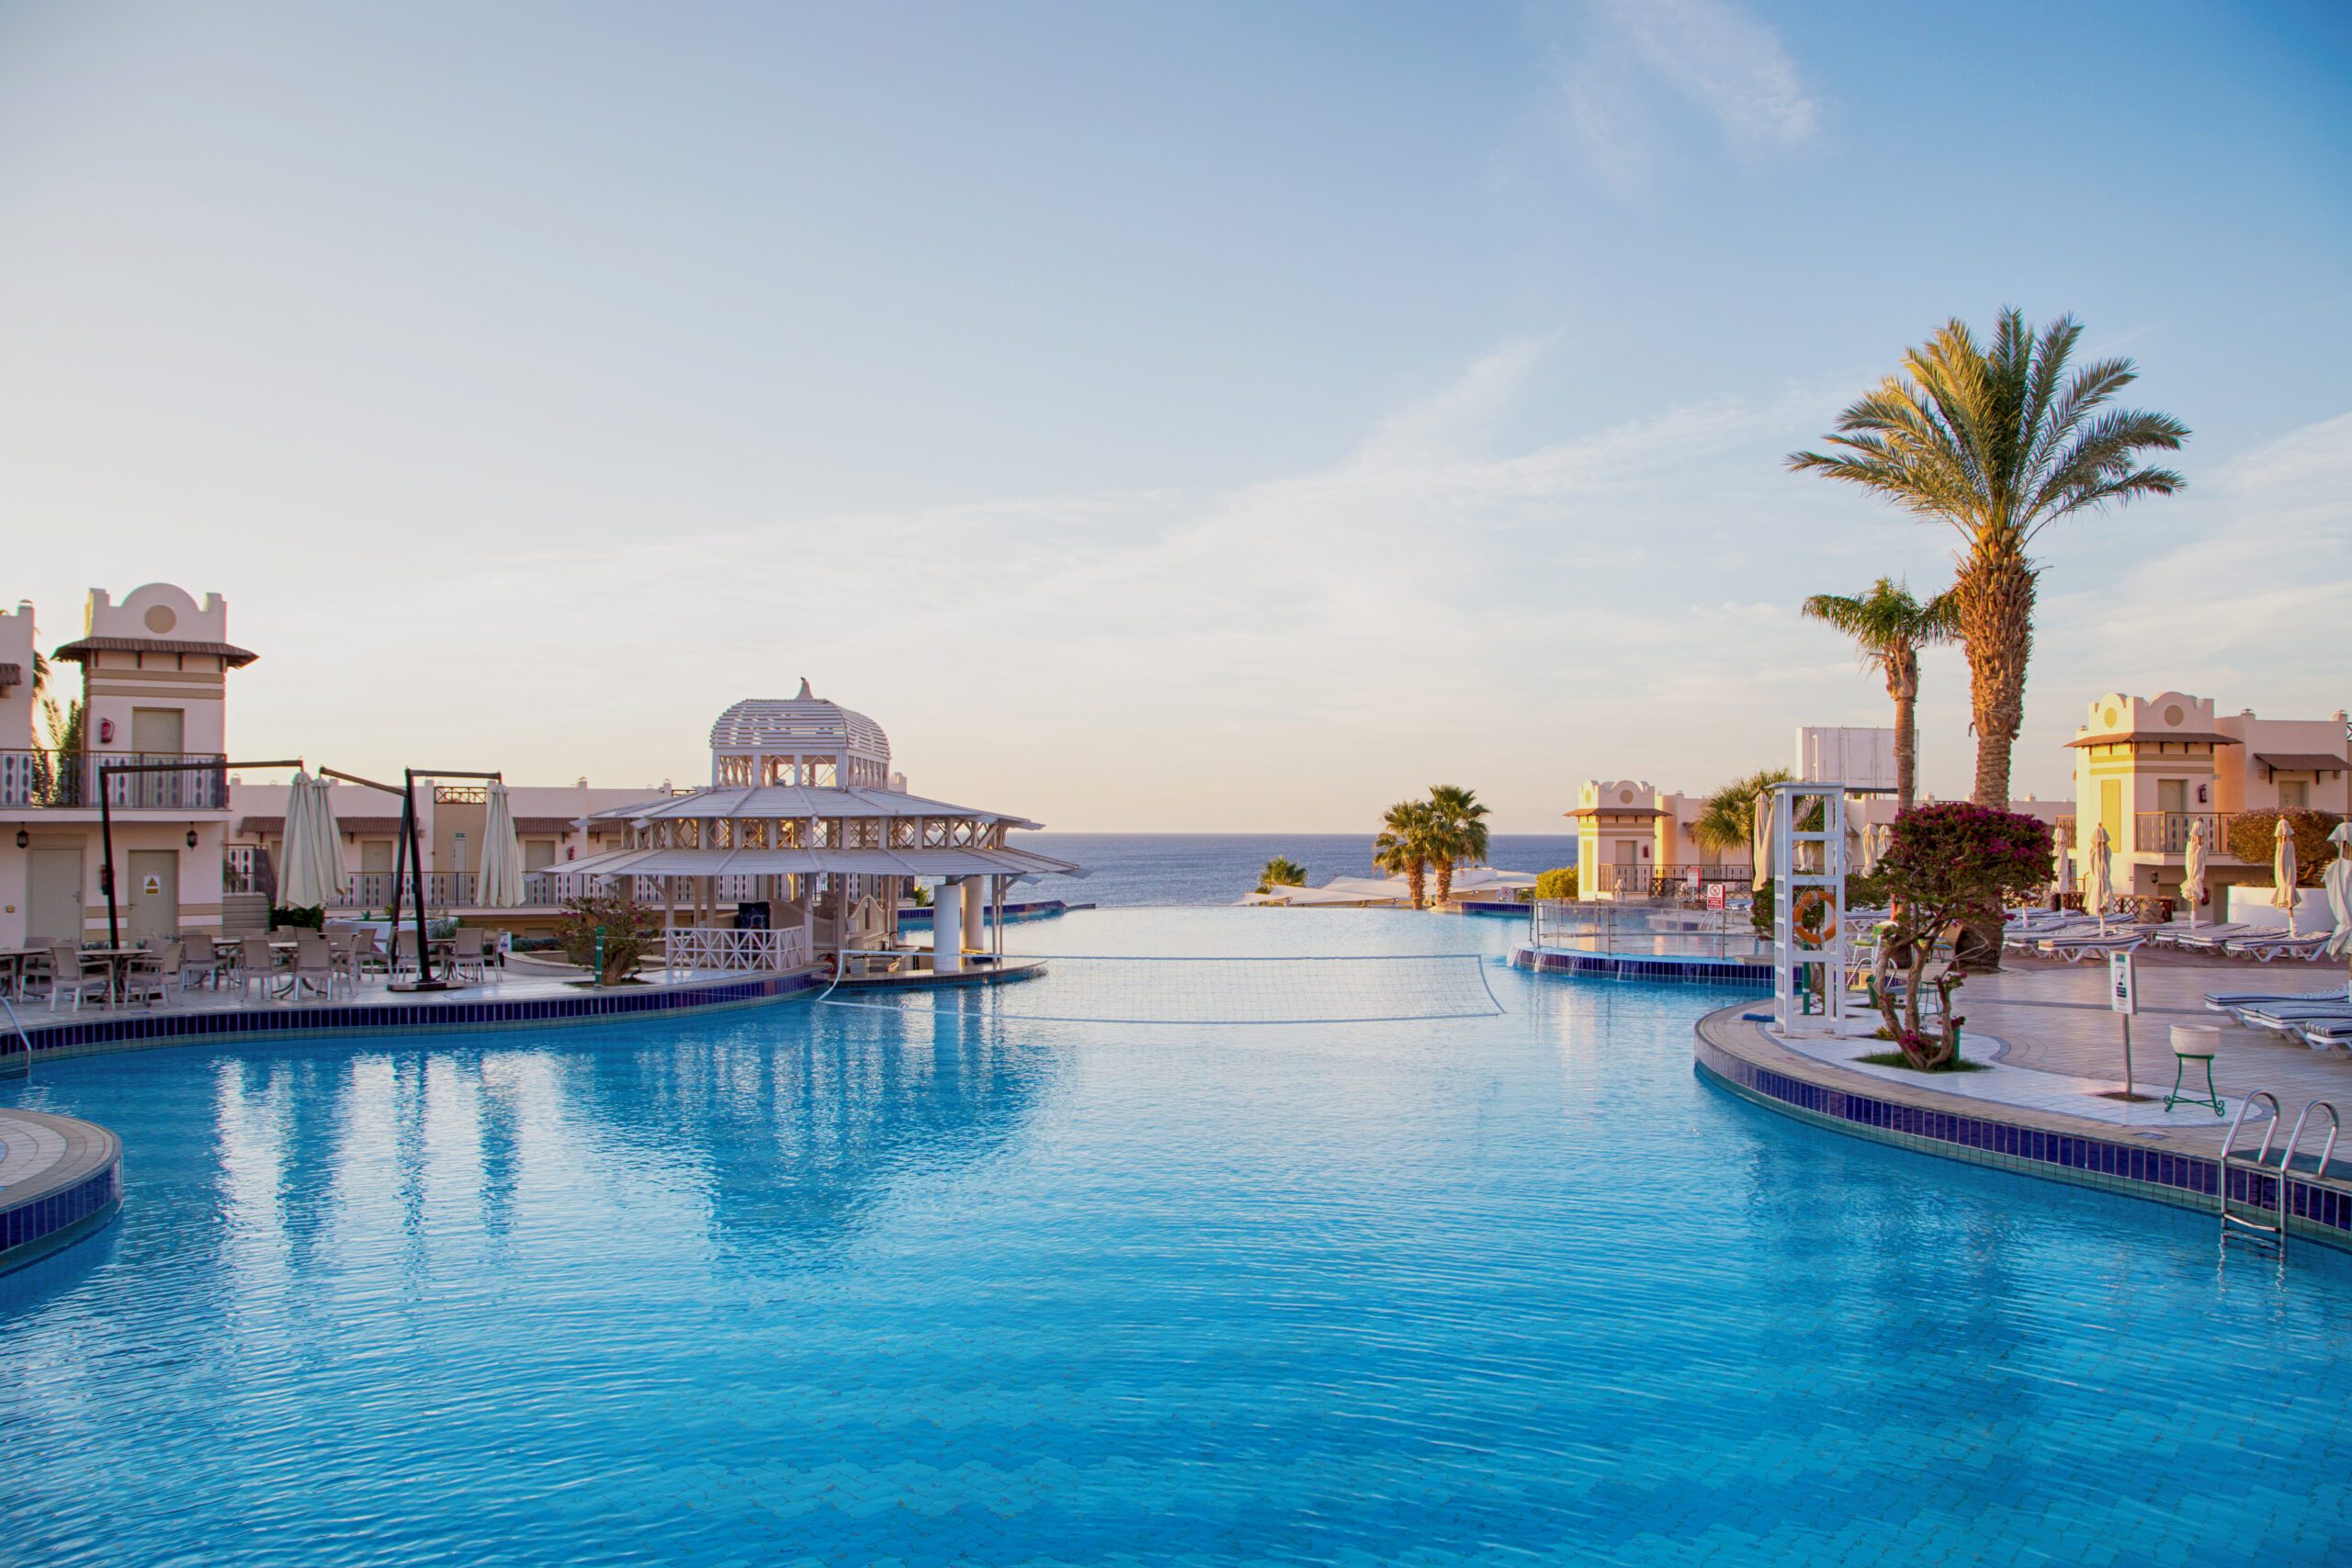 SHARM EL SHEIKH, EGYPT – March 18, 2019: Building, Concord Hotel. View of the beautiful pool with palm trees. Background for tourism and travel. Clear water and blue sky.